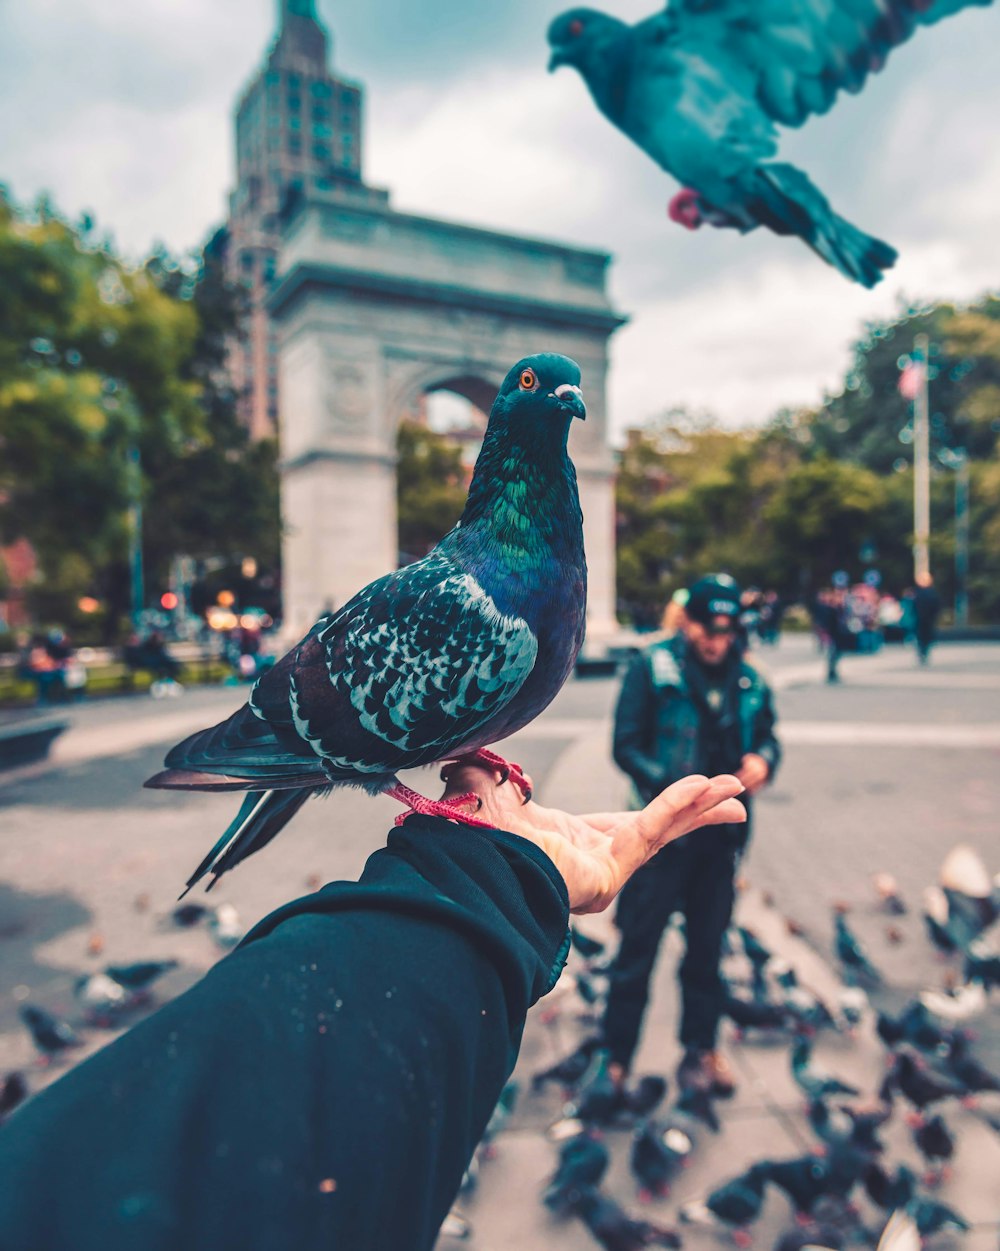 pigeon bird standing on person's hand